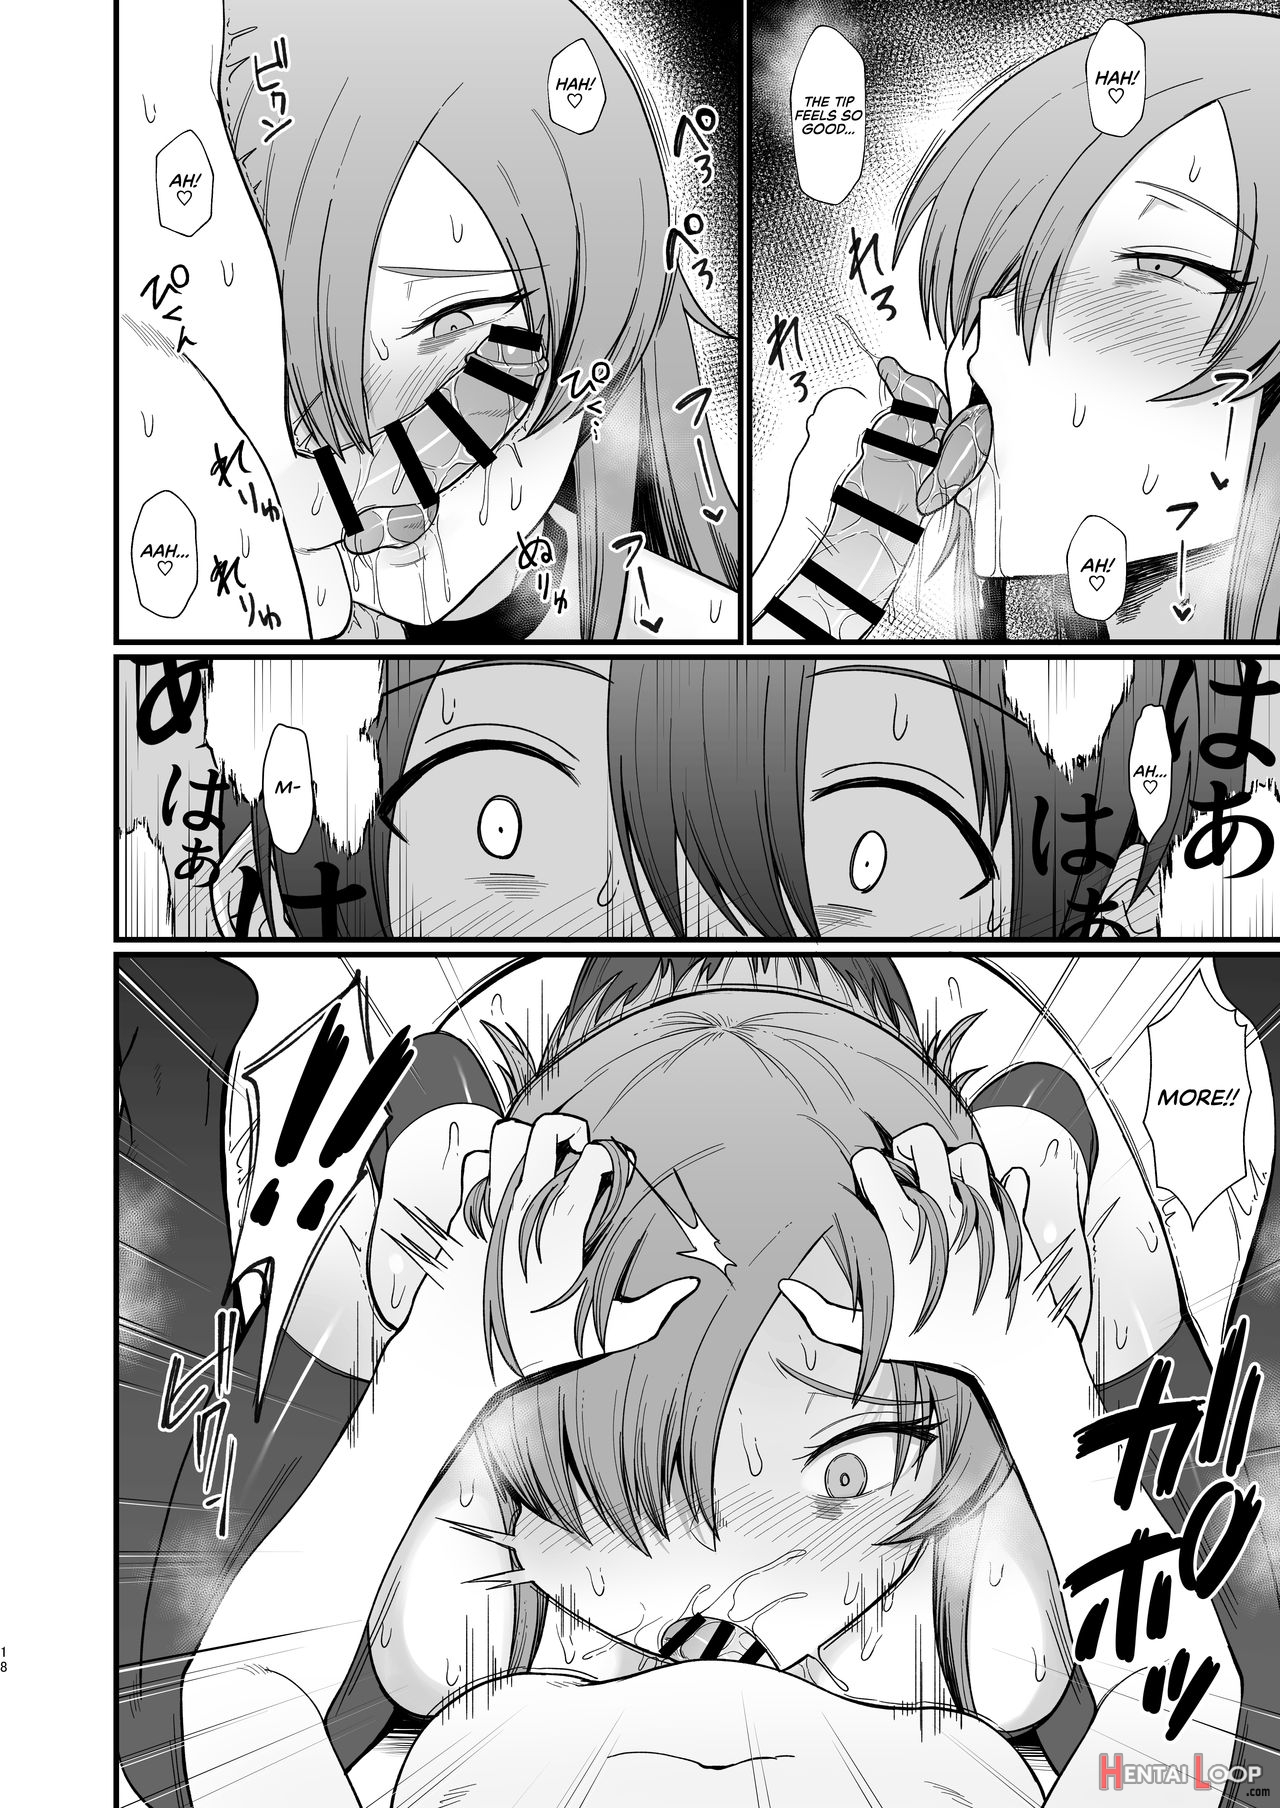 Ravaged By A Shota In Another World page 2